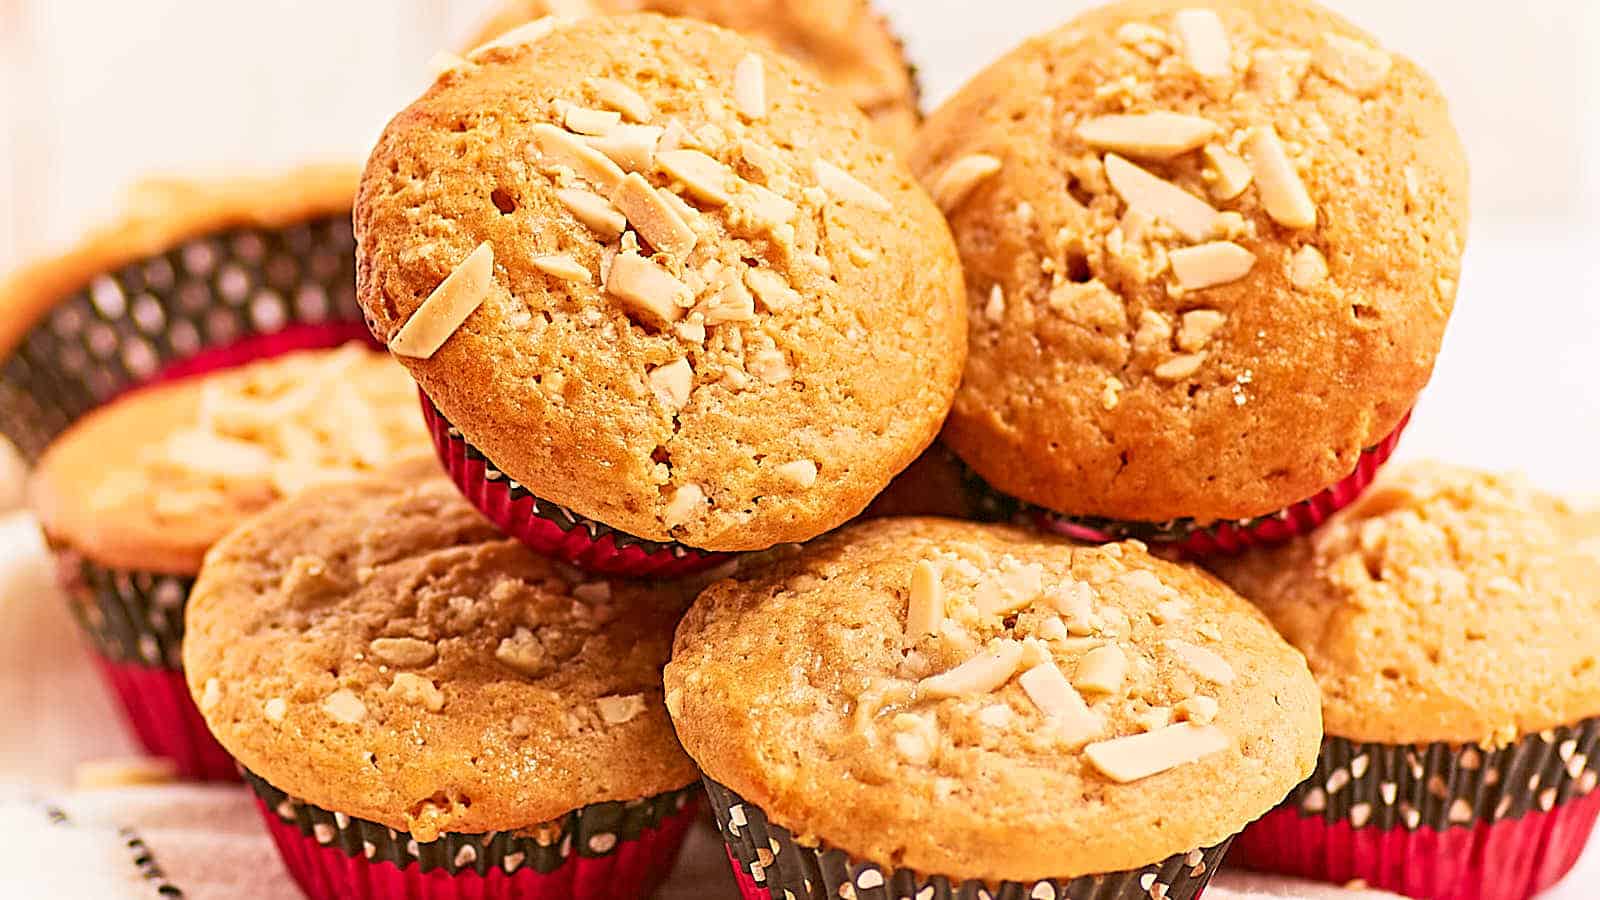 Banana Bread Muffins recipe by Cheerful Cook.